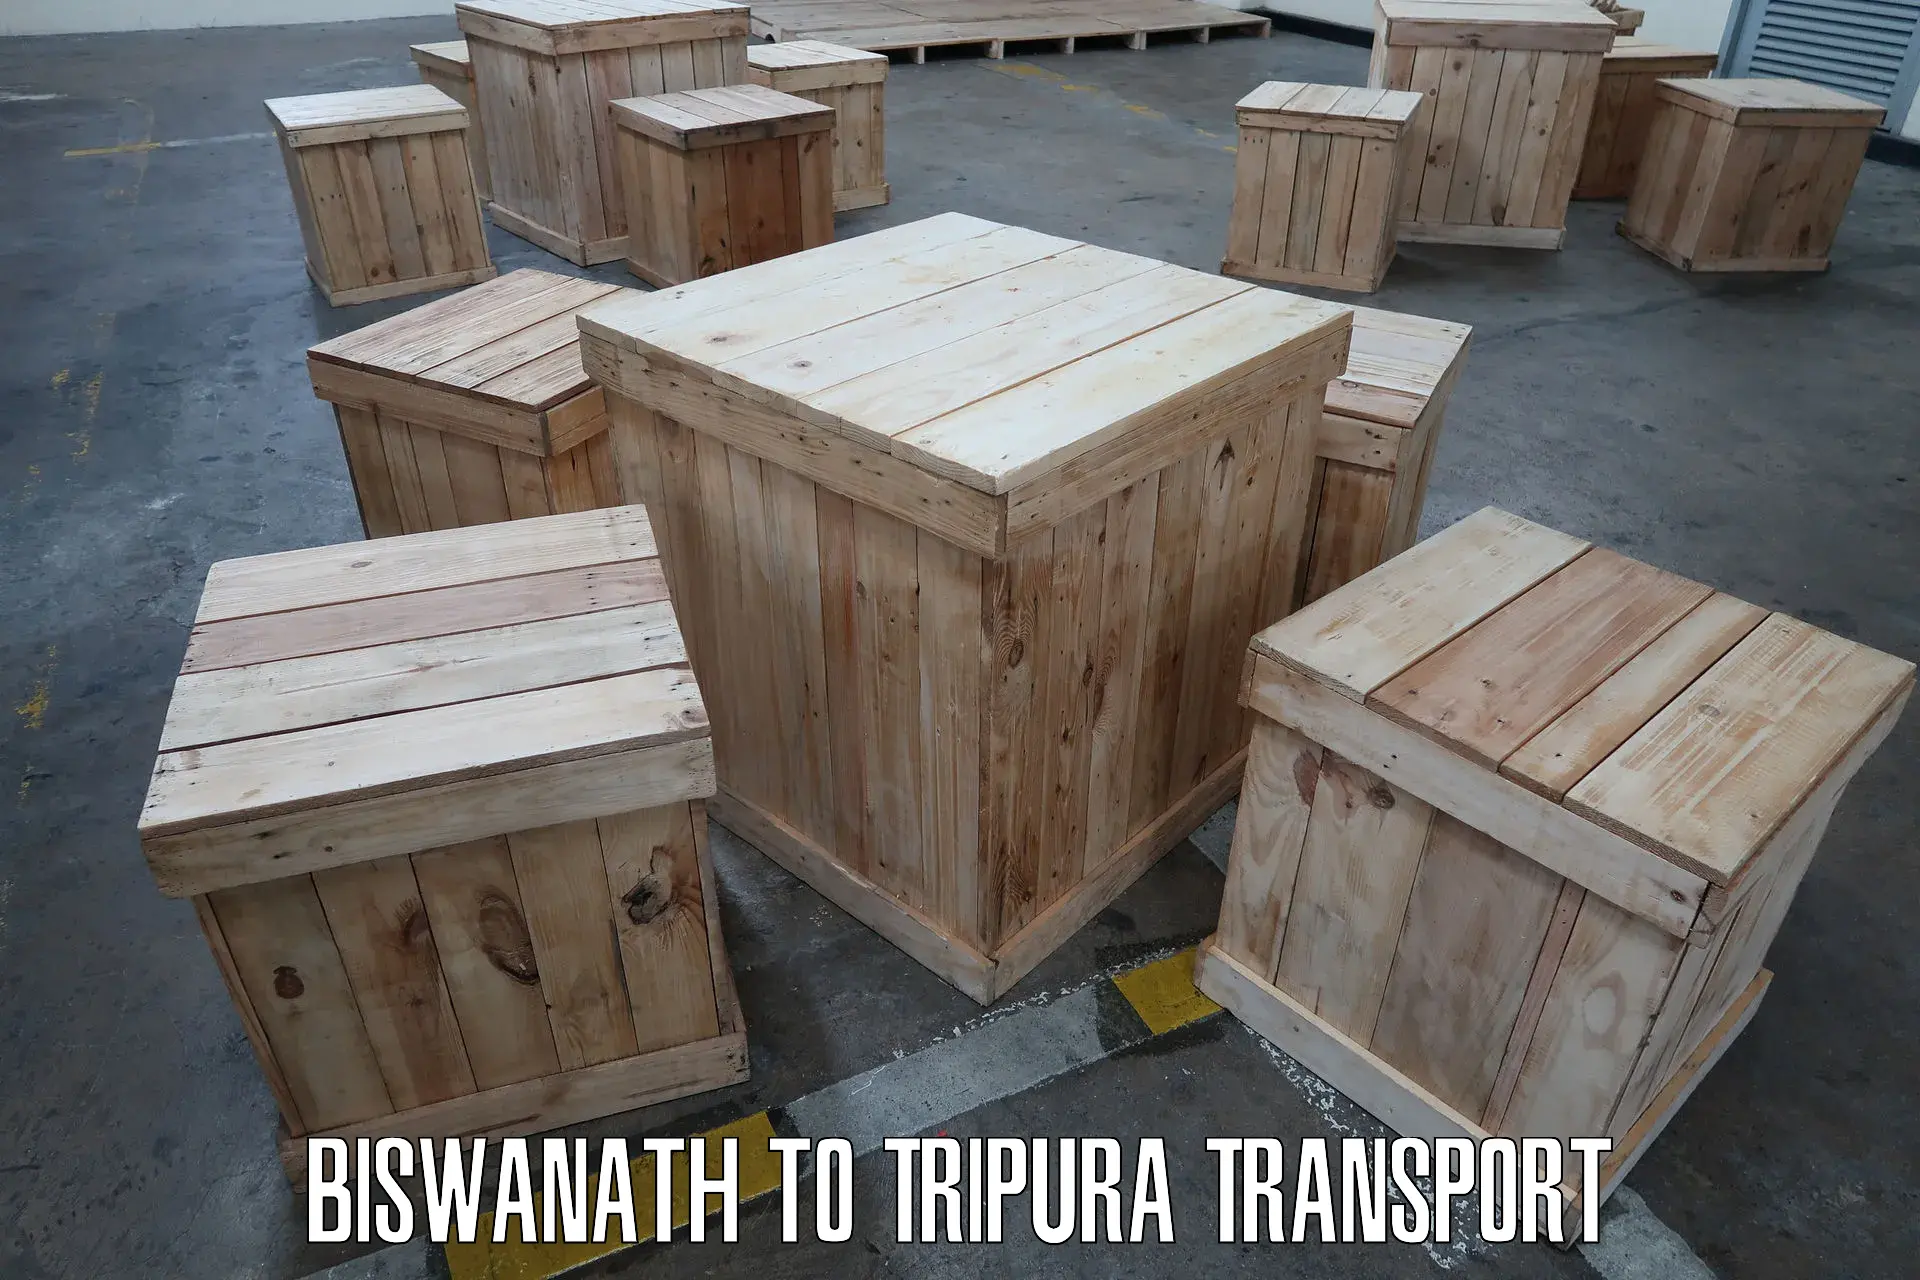 Truck transport companies in India Biswanath to Kailashahar